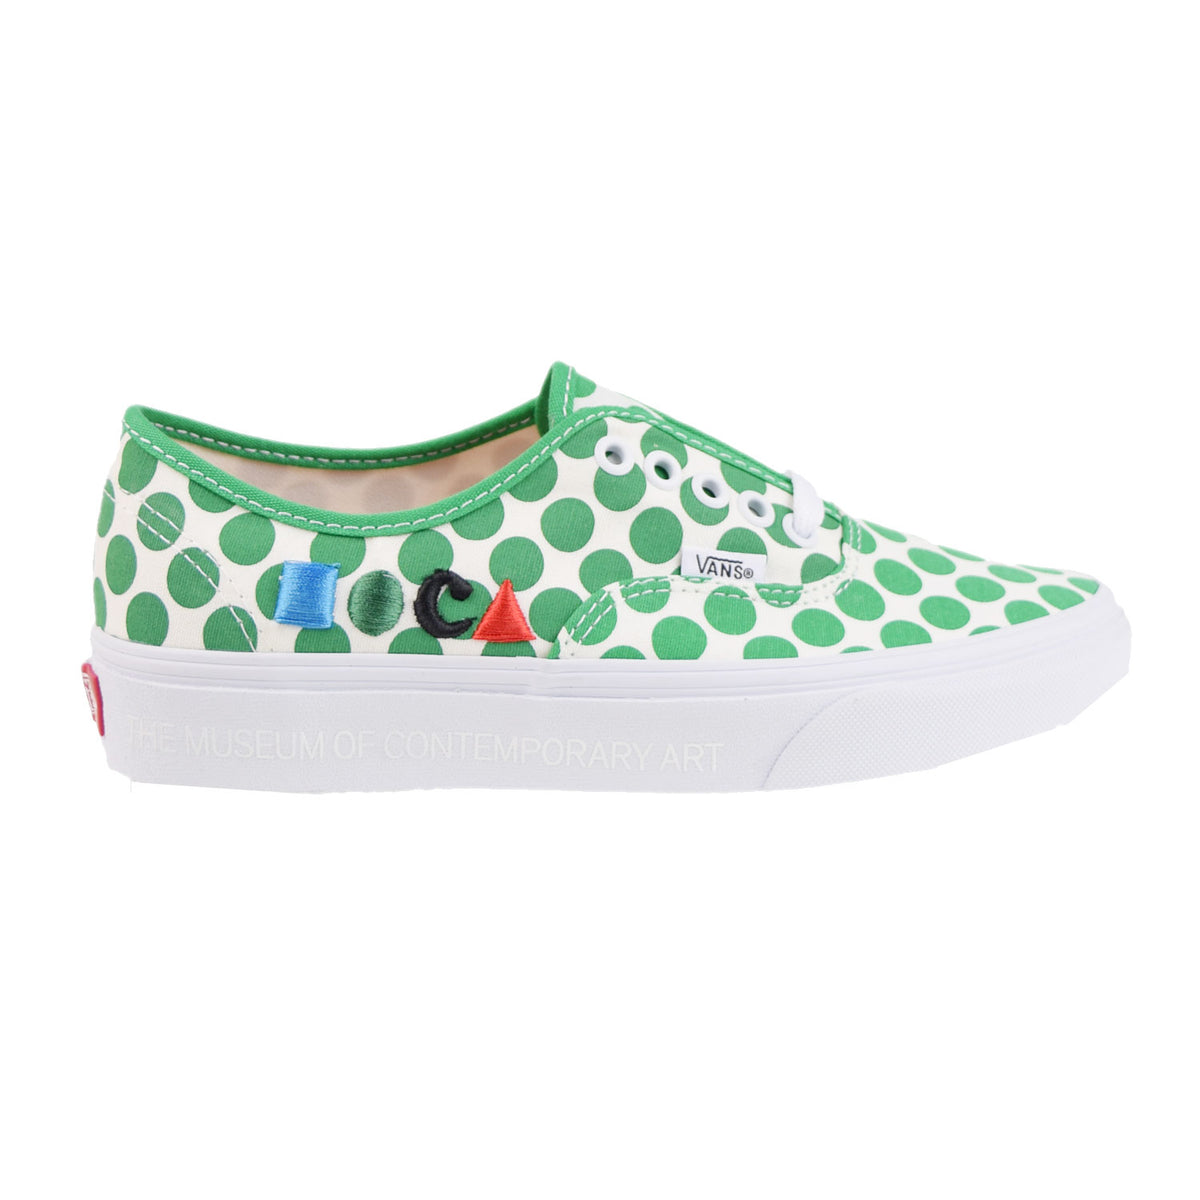 Incubus stressende Addition Vans X Moca Brenna Youngblood Authentic Men's Shoes White-Green